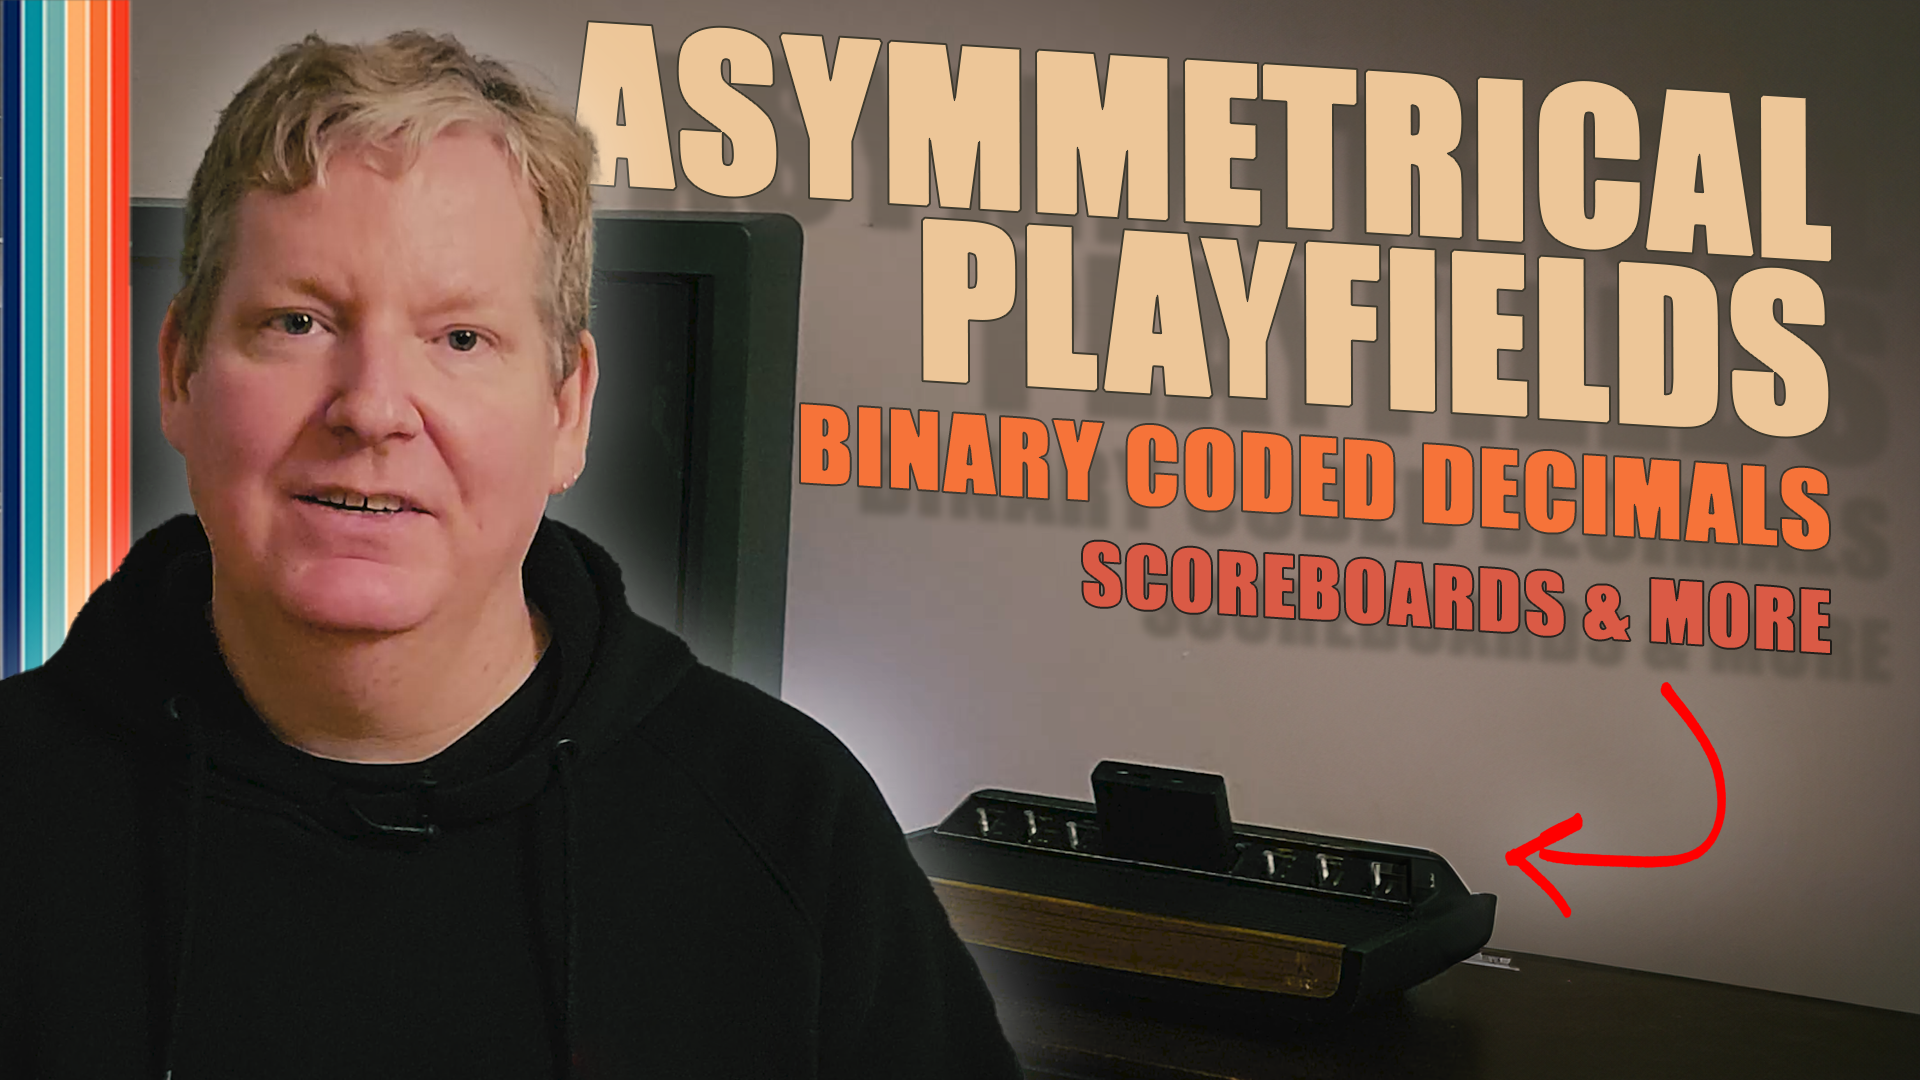 Learn how the to program your game for differnt world regions for the ATARI 2600 game system